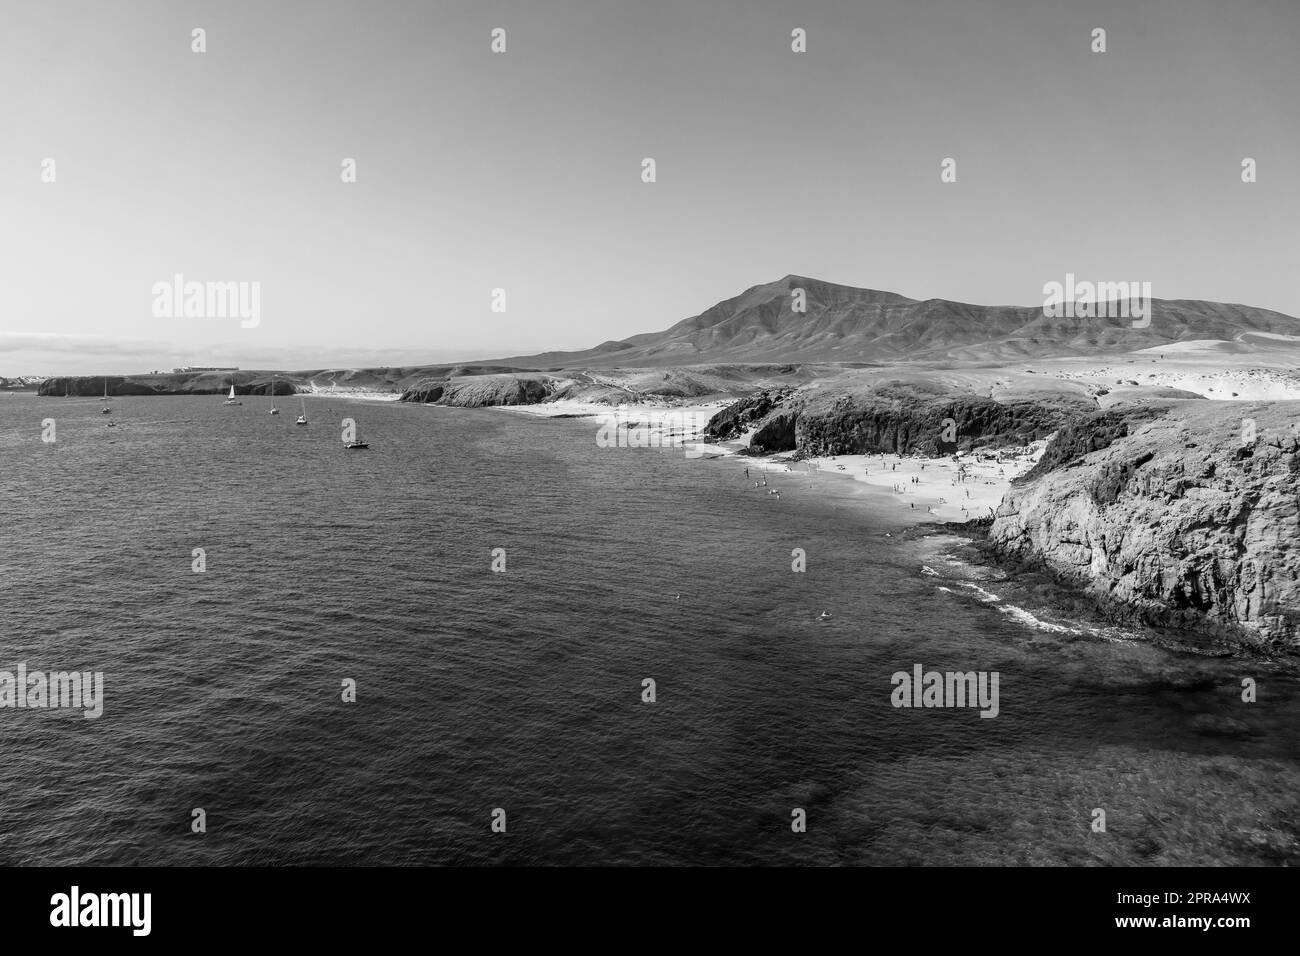 Playa de la Cera, Playa del Pozo and Playa Mujeres are popular and beautiful beaches in Lanzarote, Canary Islands, Spain. Black and white. Stock Photo